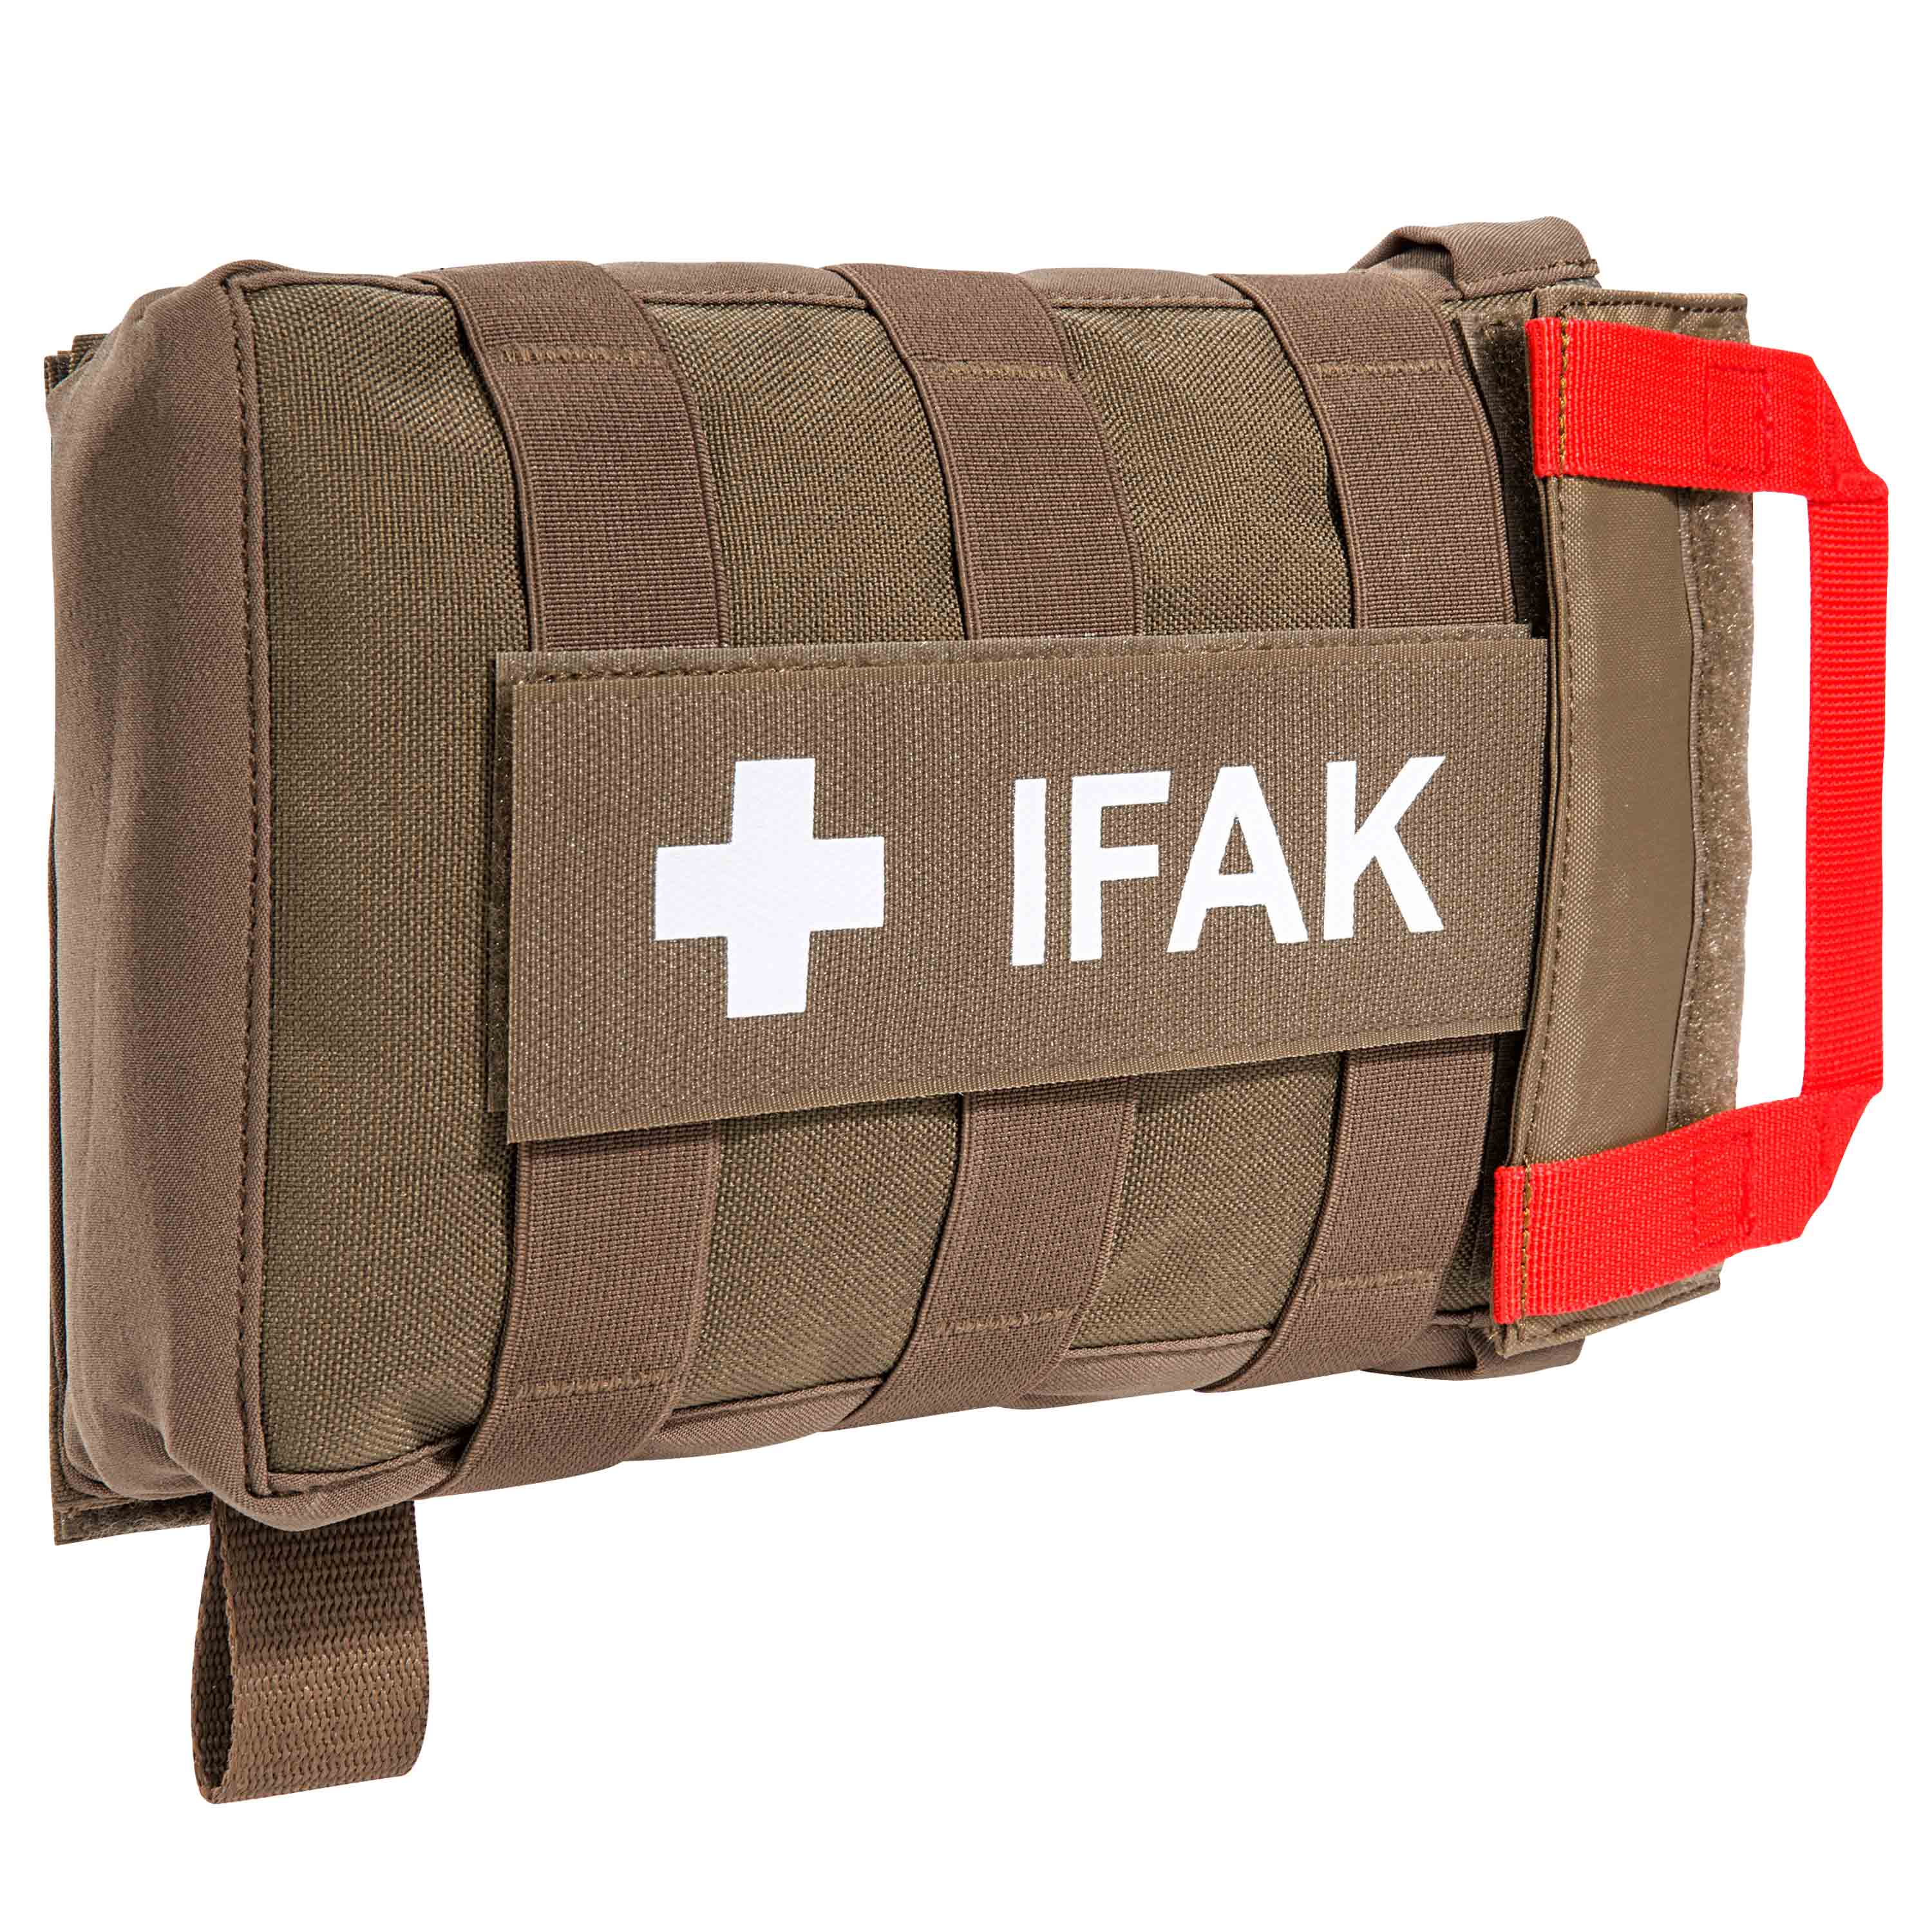 REMOVABLE INSERT TASMANIAN TIGER IFAK-S POUCH TRAUMA MEDICAL FIRST AID POUCH